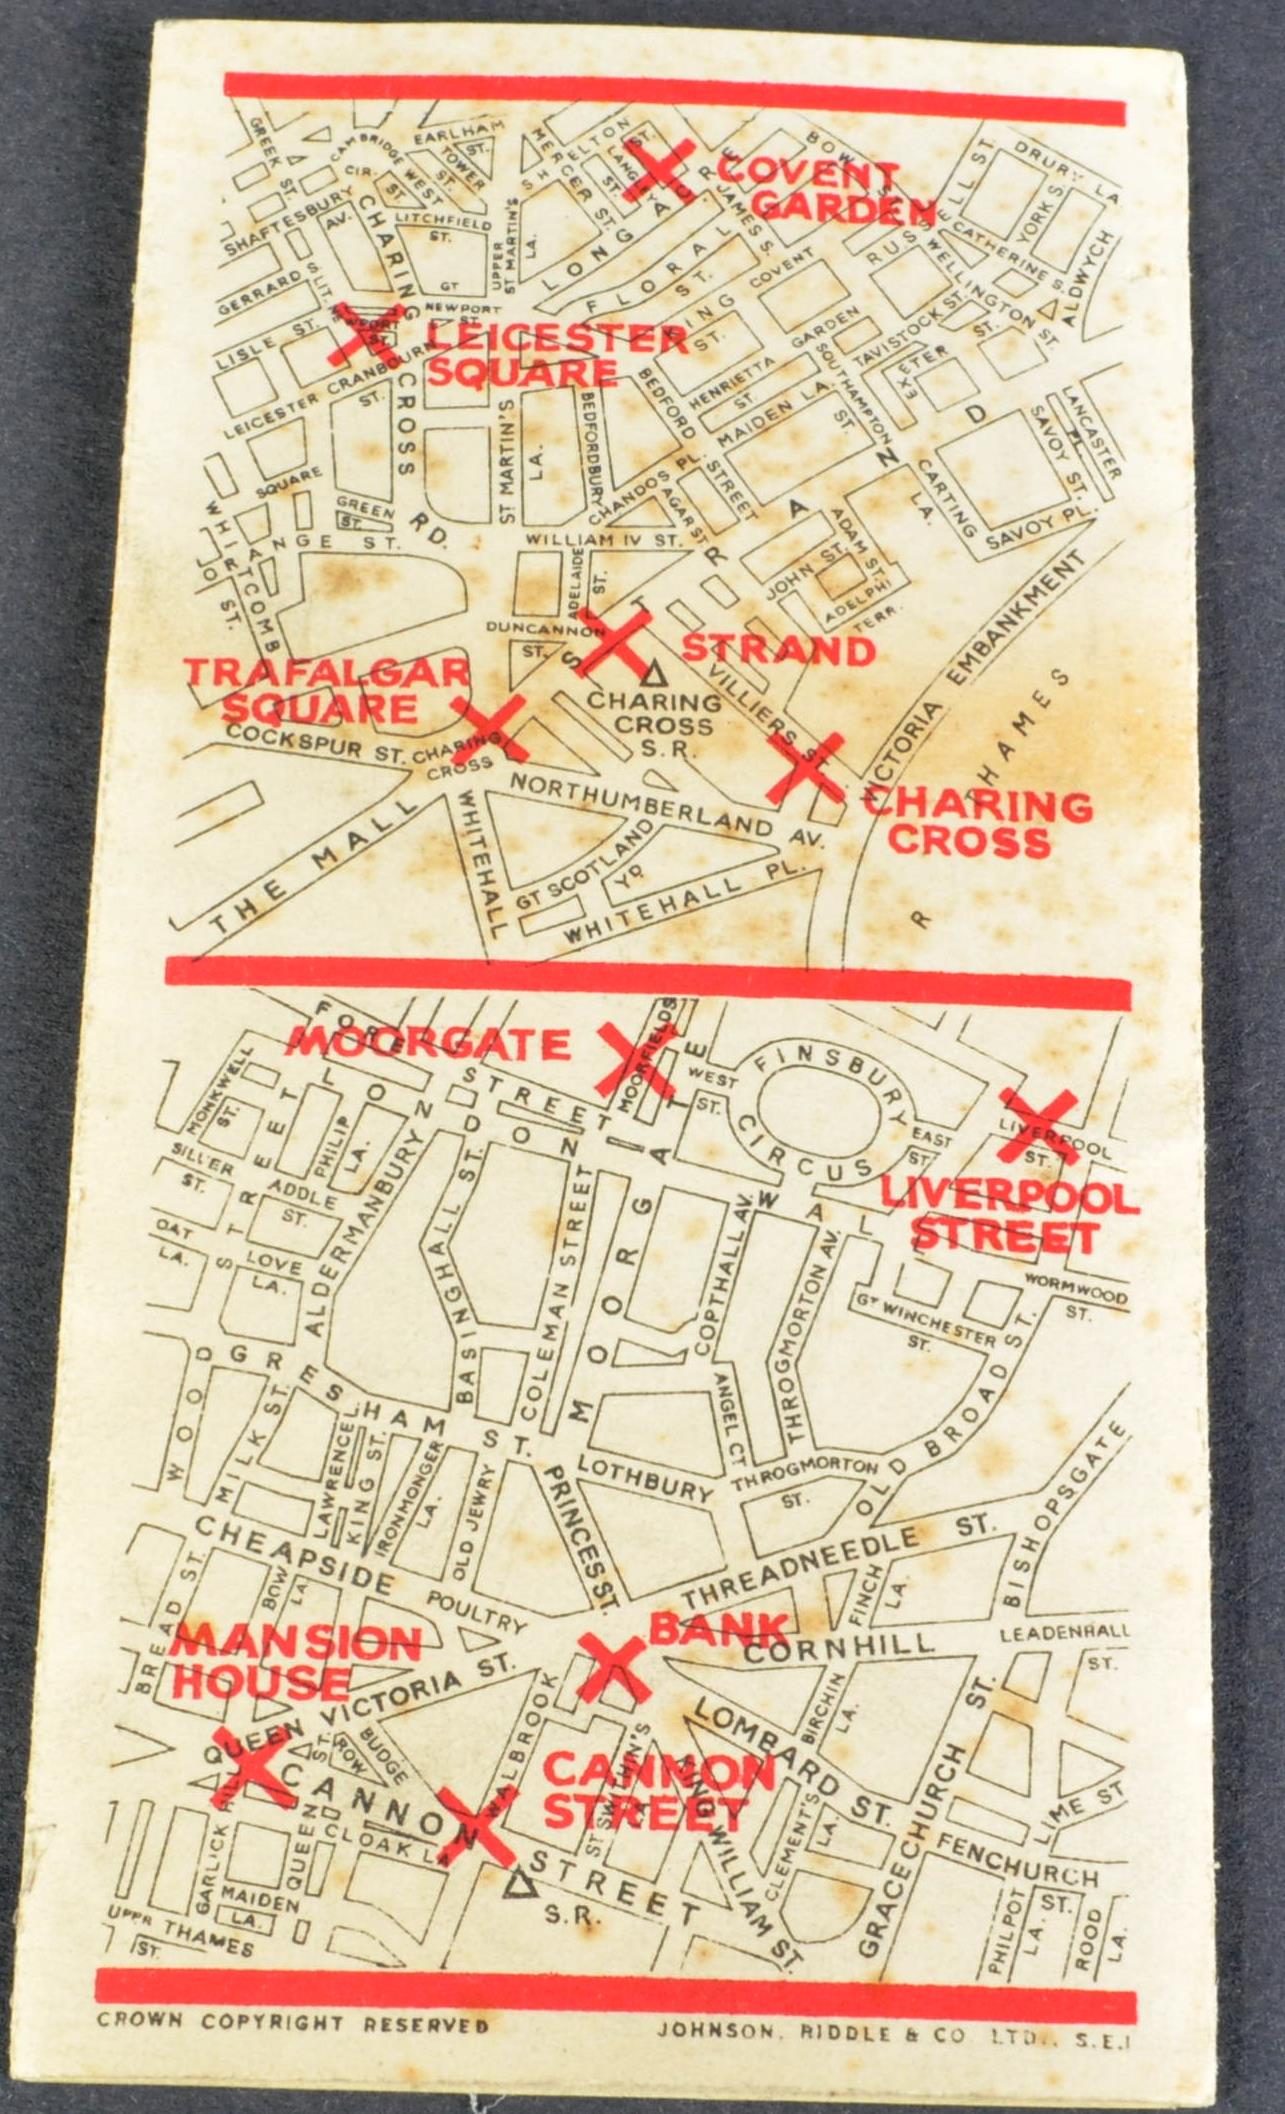 WWII SECOND WORLD WAR 1941 LONDON UNDERGROUND ISSUED SHELTER MAP - Image 5 of 6